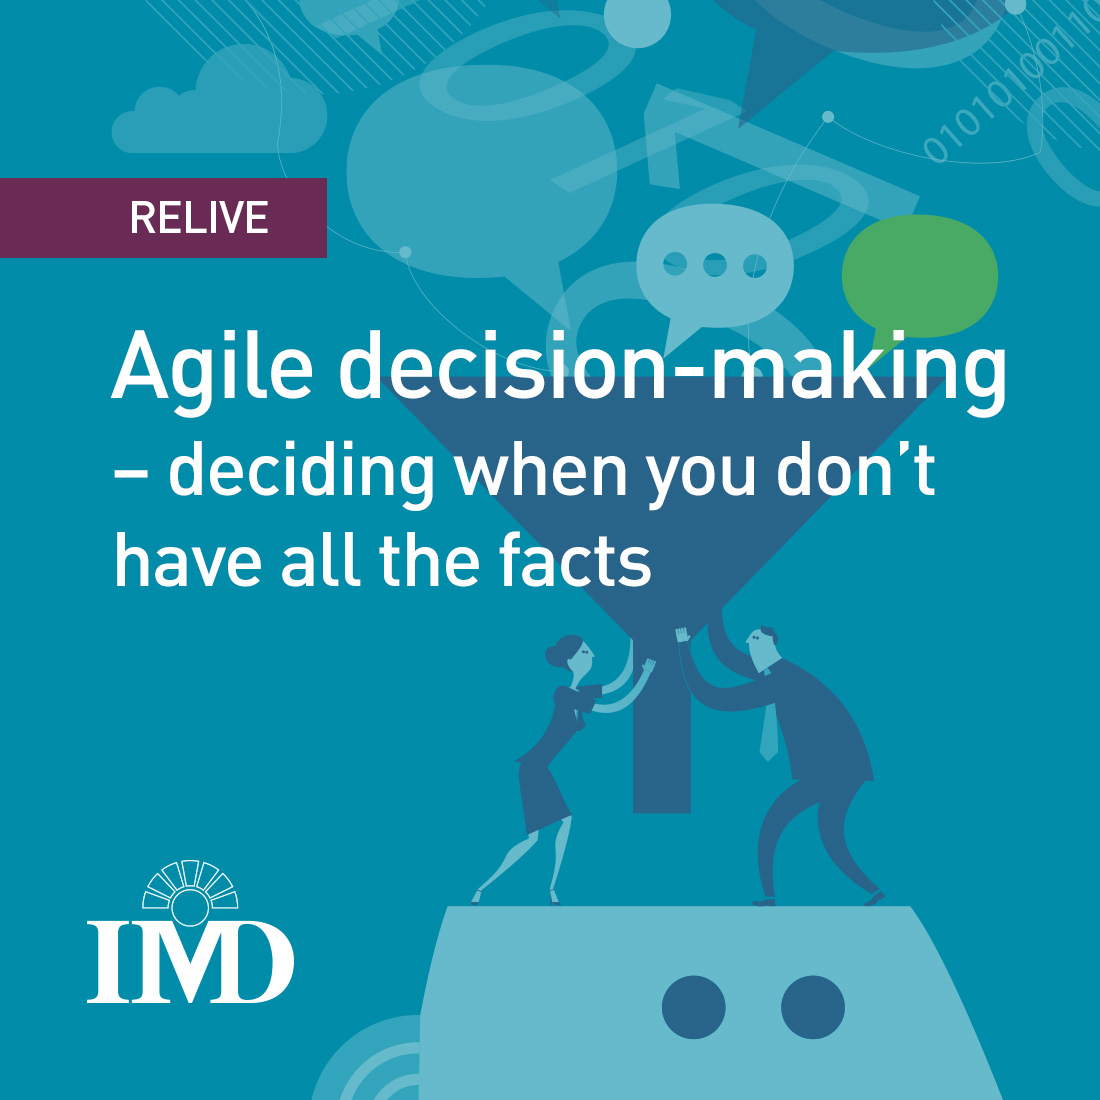 Agile decision-making – deciding when you don’t have all the facts